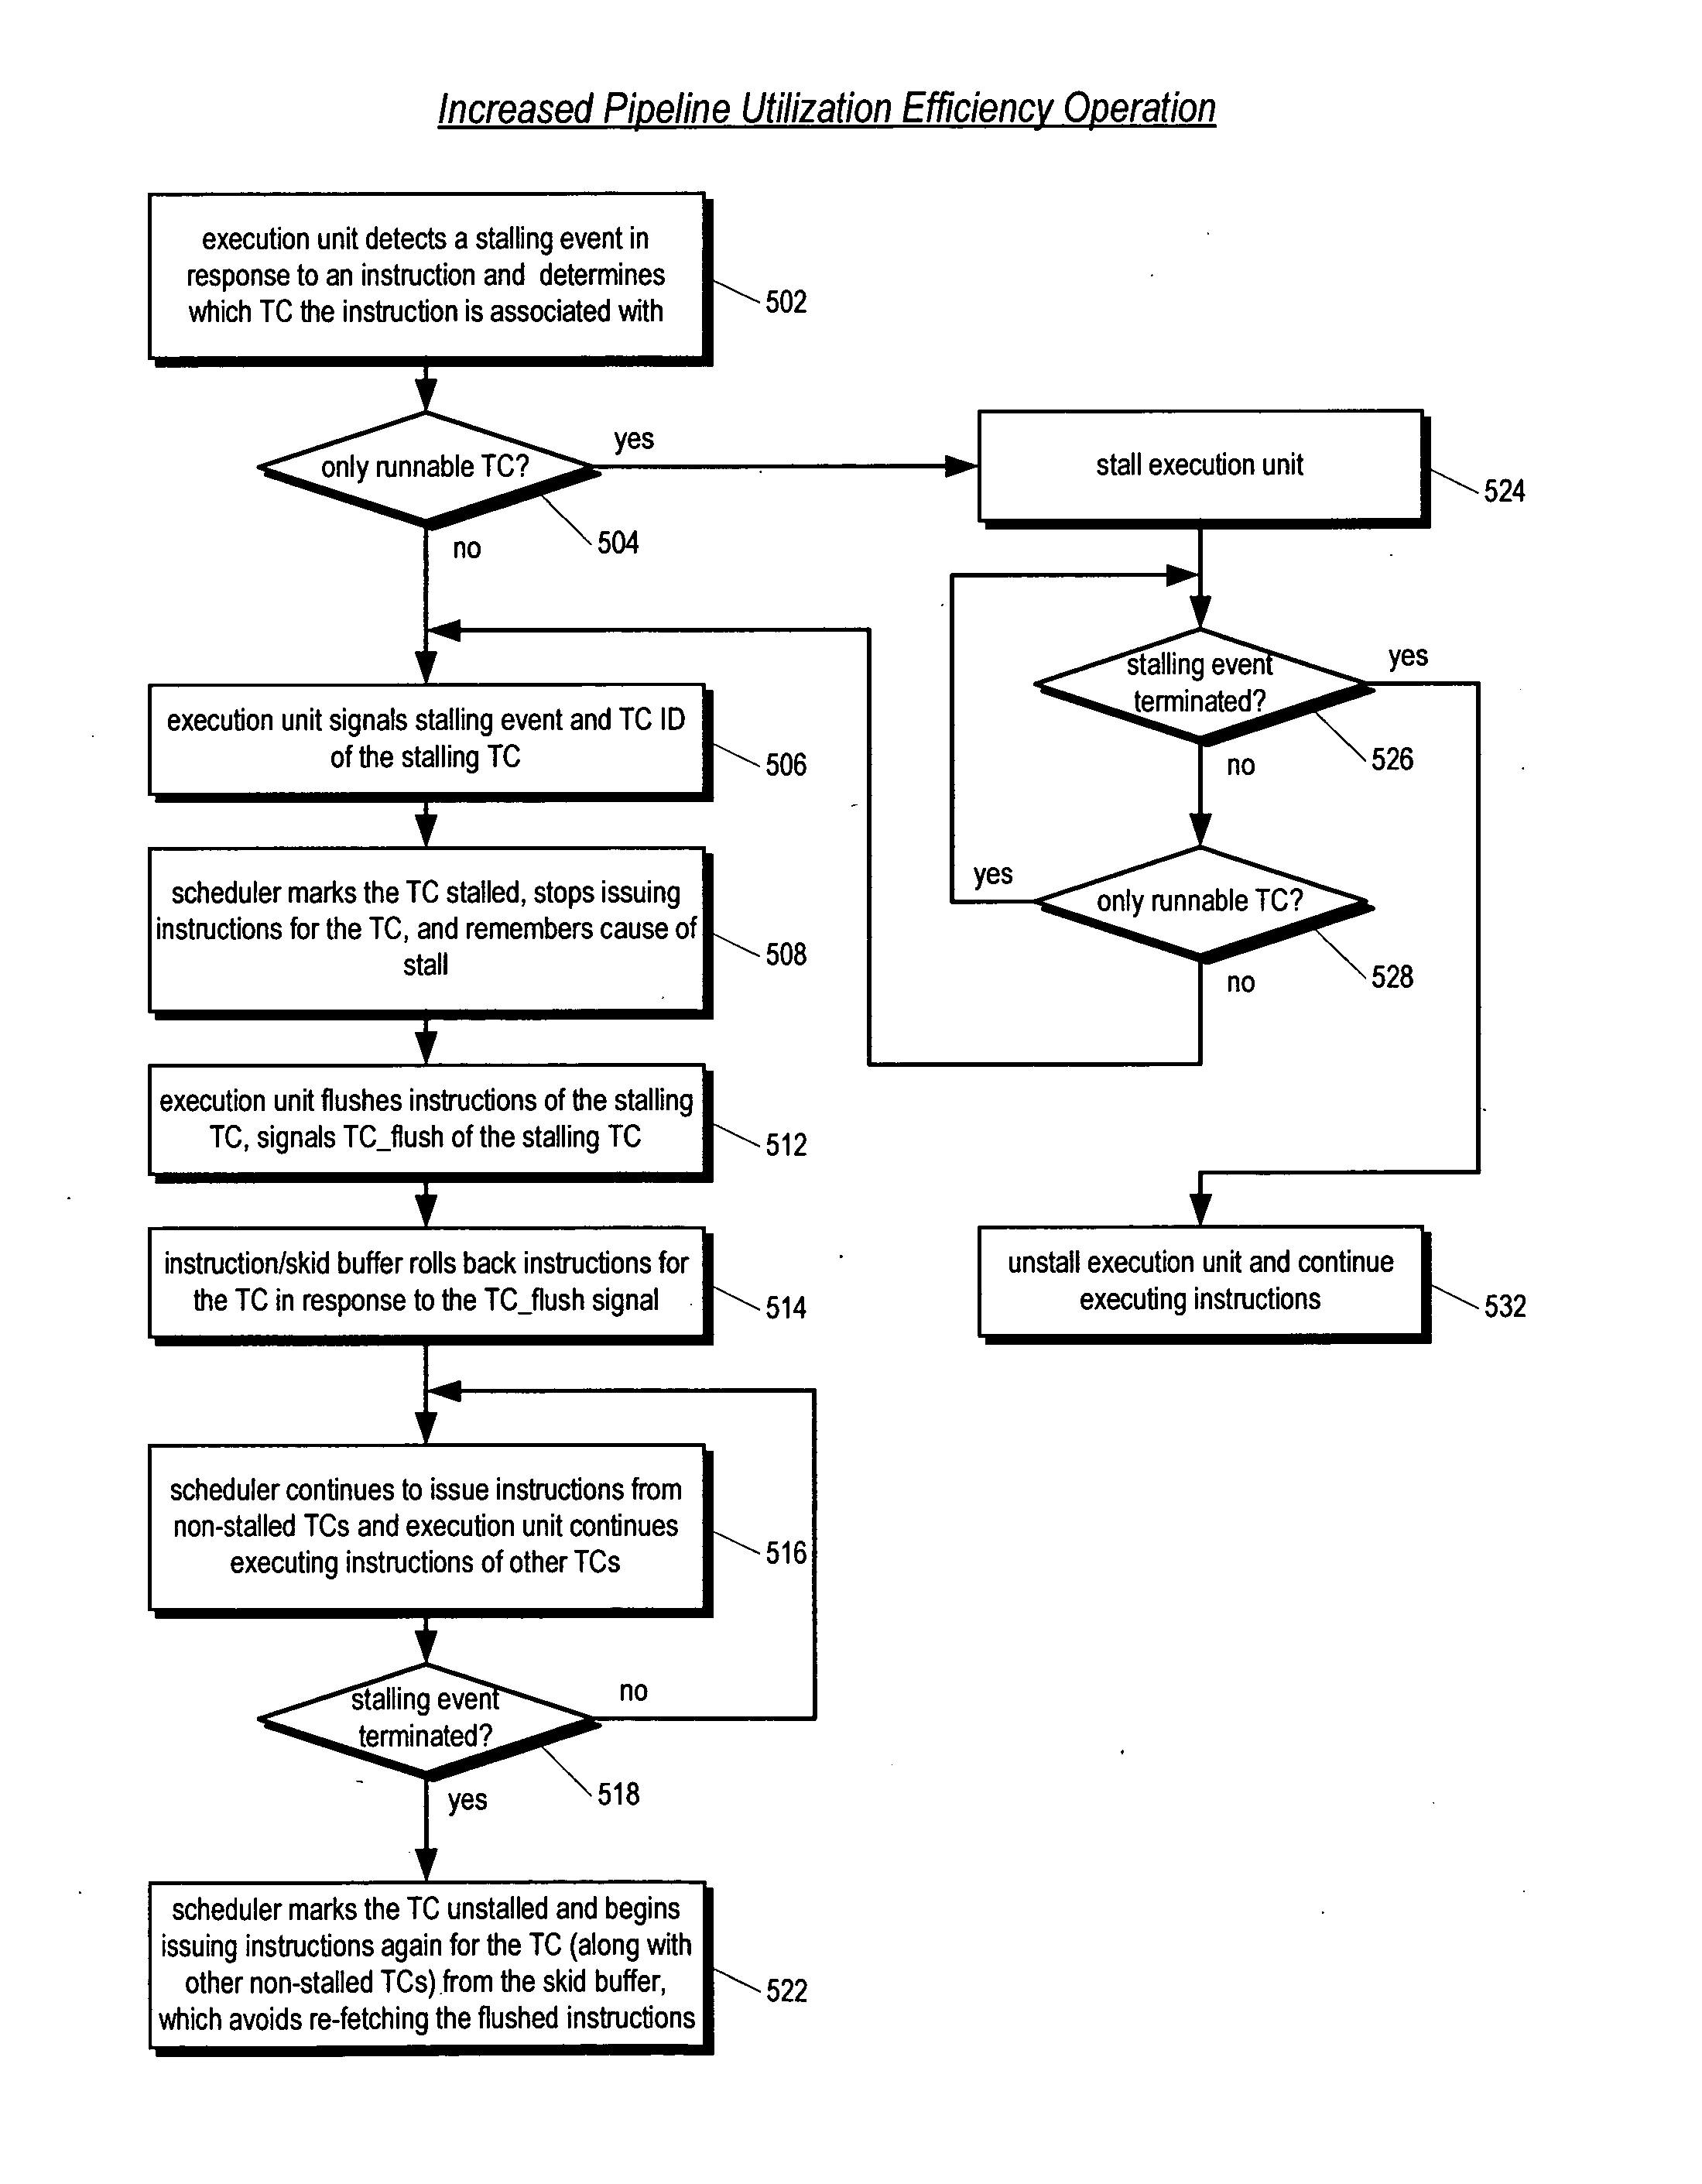 Multithreading microprocessor with optimized thread scheduler for increasing pipeline utilization efficiency